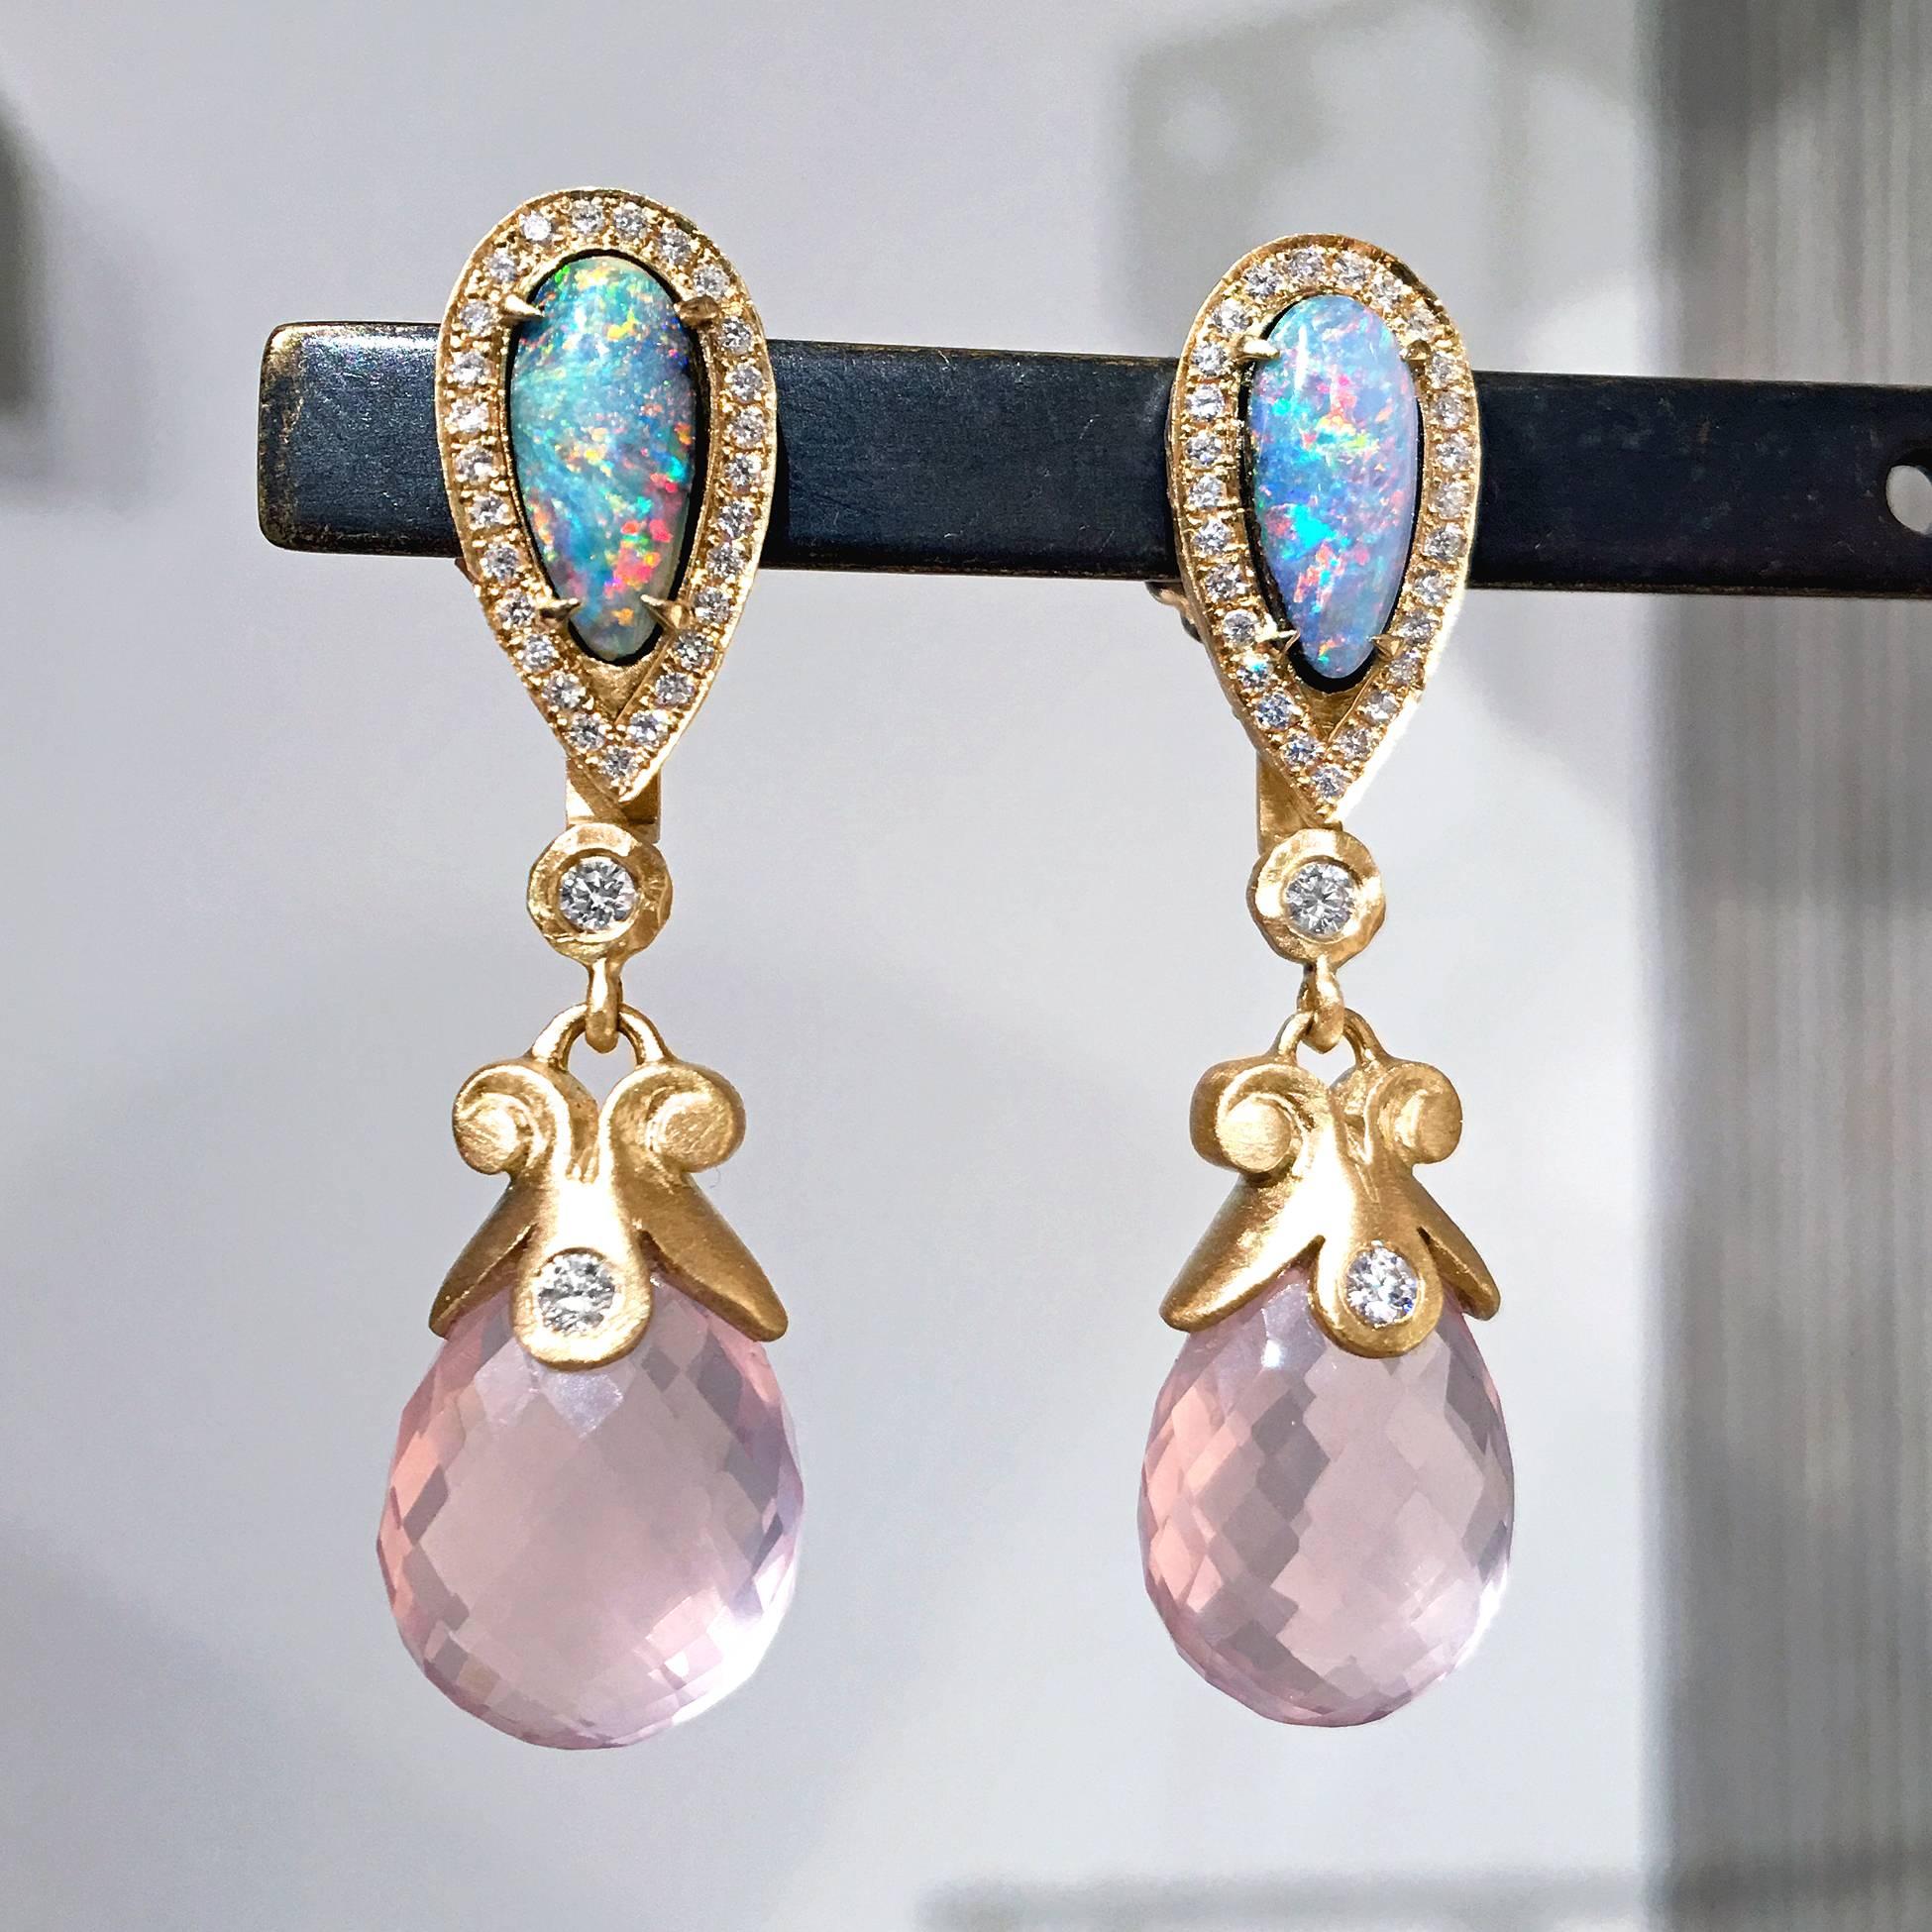 Versatile One of a Kind Stud Earrings handmade in signature-finished 18k yellow gold by award-winning jewelry designer Pamela Froman showcasing a matched pair of fiery Australian boulder opals totaling 2.26 carats surrounded by 0.27 total carats of